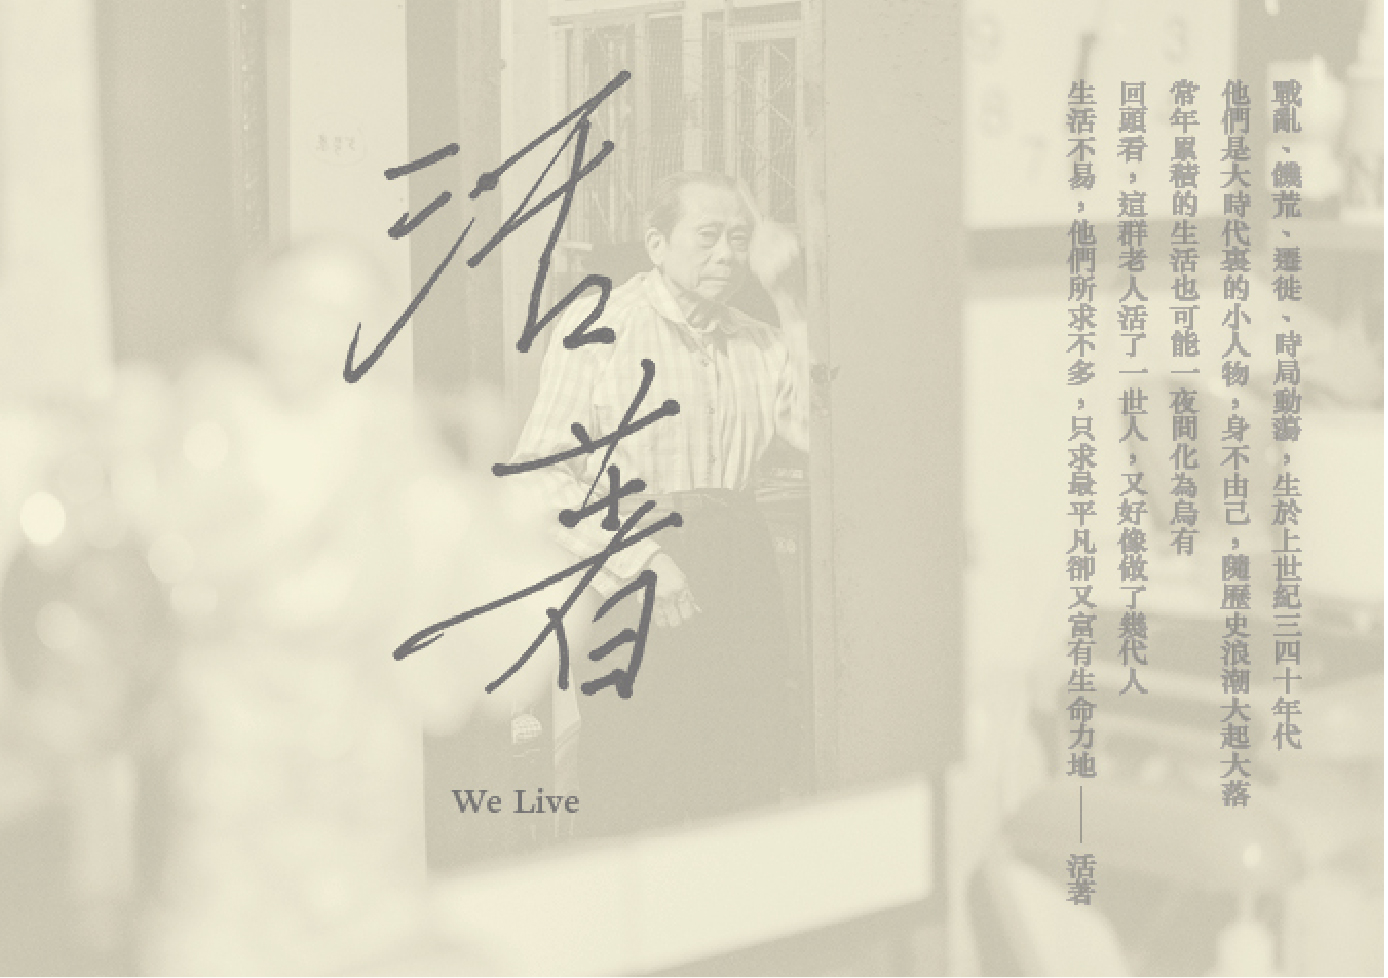 We Live – Photo Exhbition of Grassroots Elderly in Hong Kong